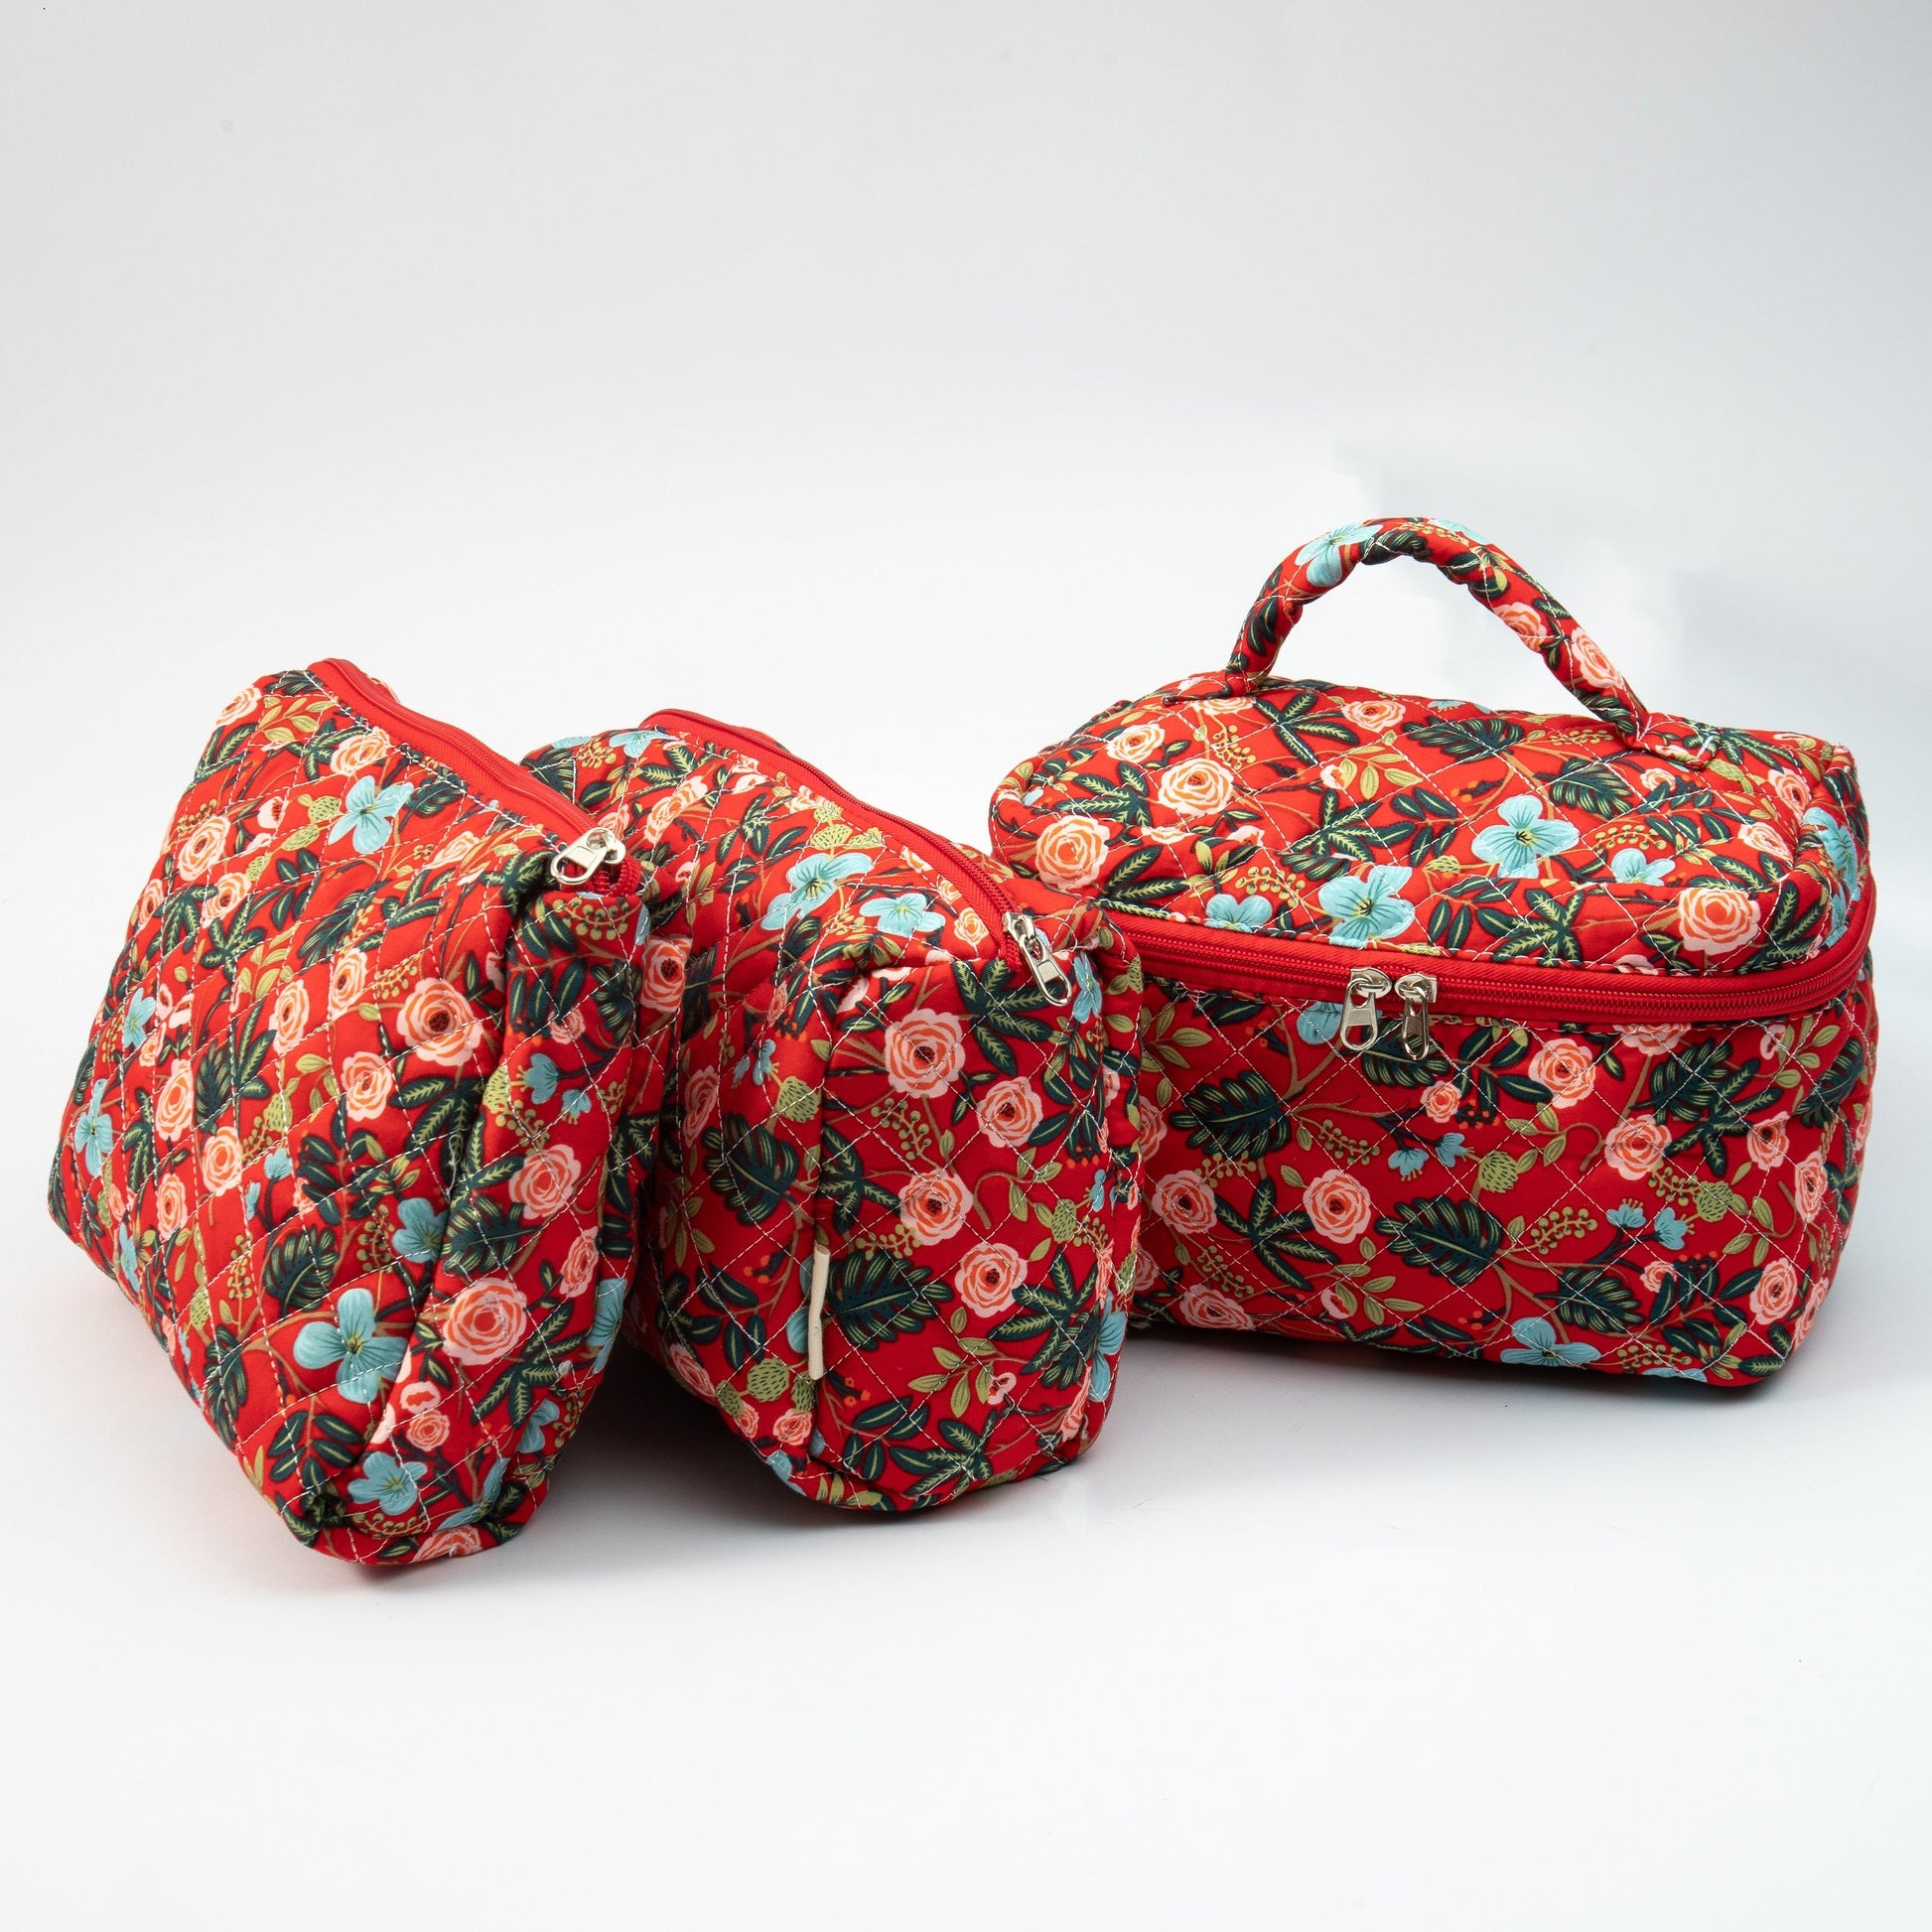 LYSANDE Floral Puffy Quilted Makeup Bag, Toiletry Tote, Cosmetics Pouch,  Quilted Tote Floral, Floral Cosmetic Bag (2 x Red Flowers)